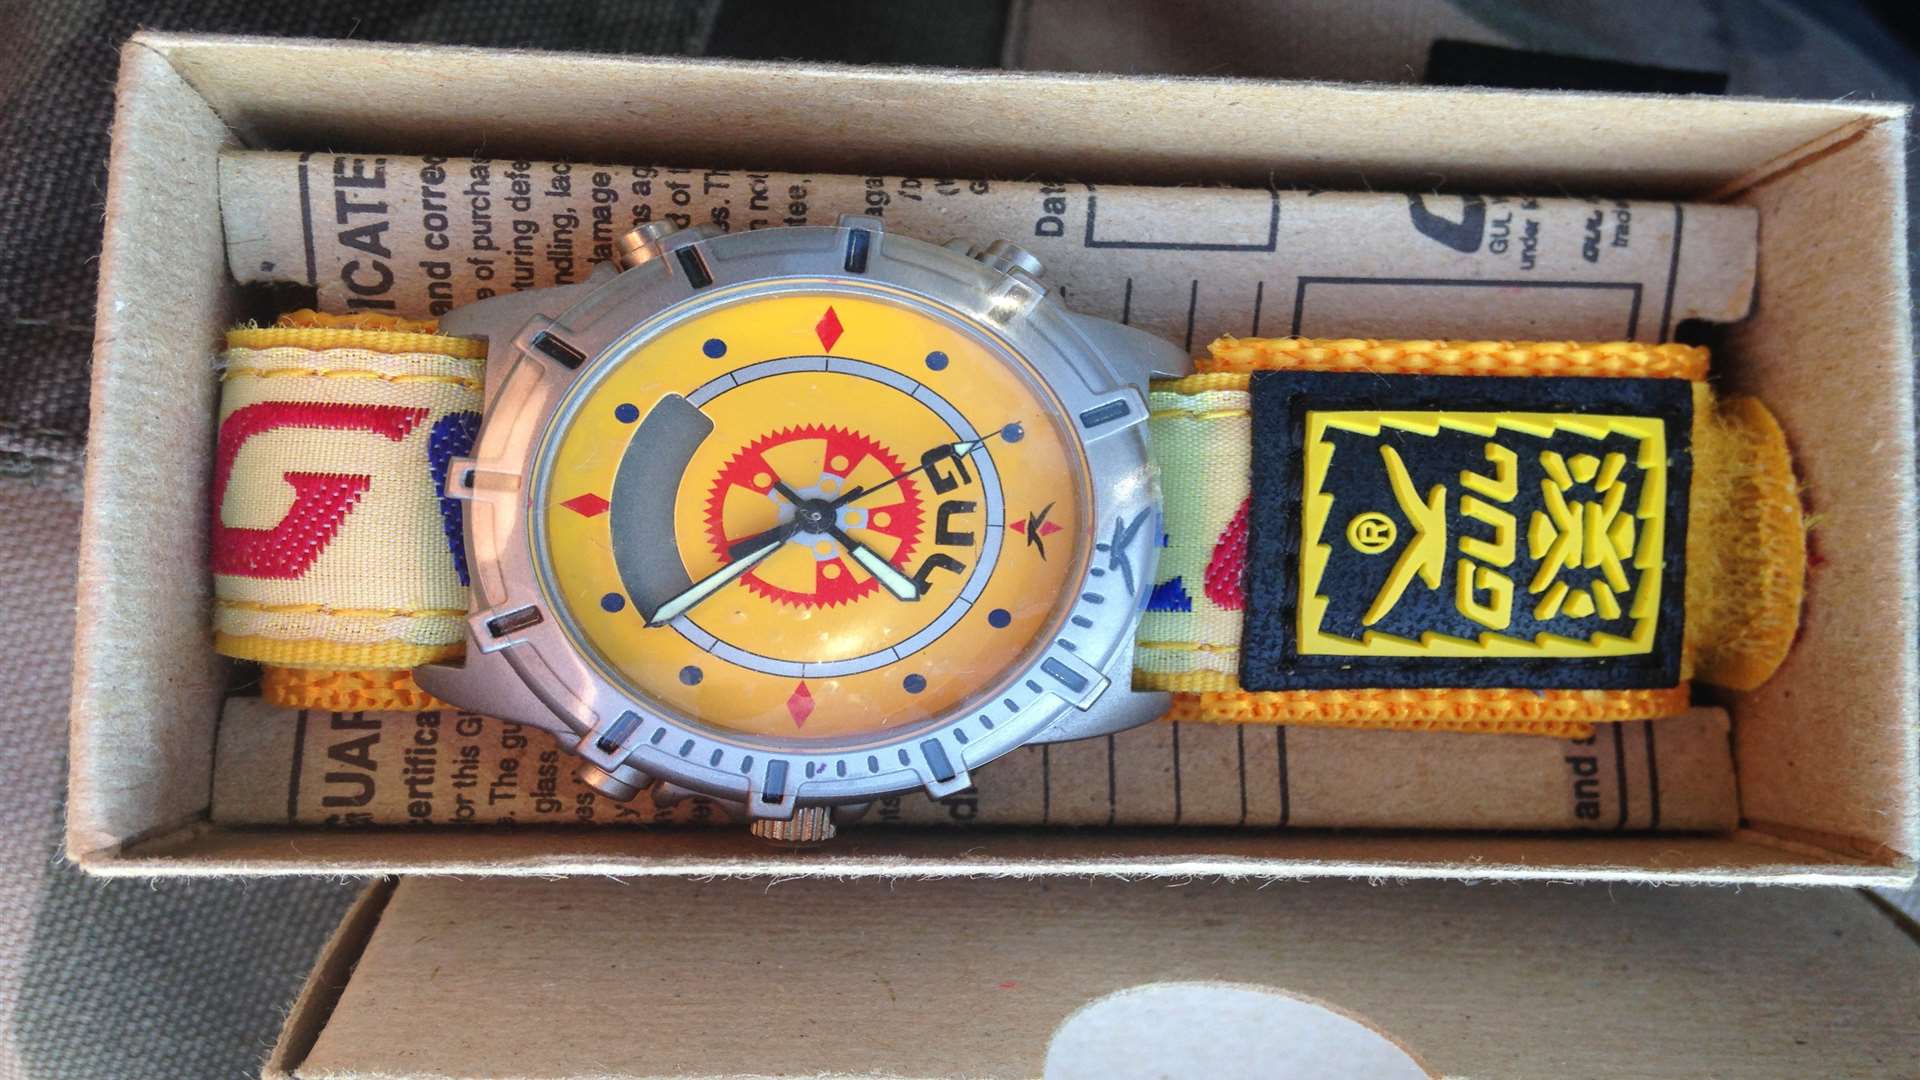 The unique watch David designed is still missing